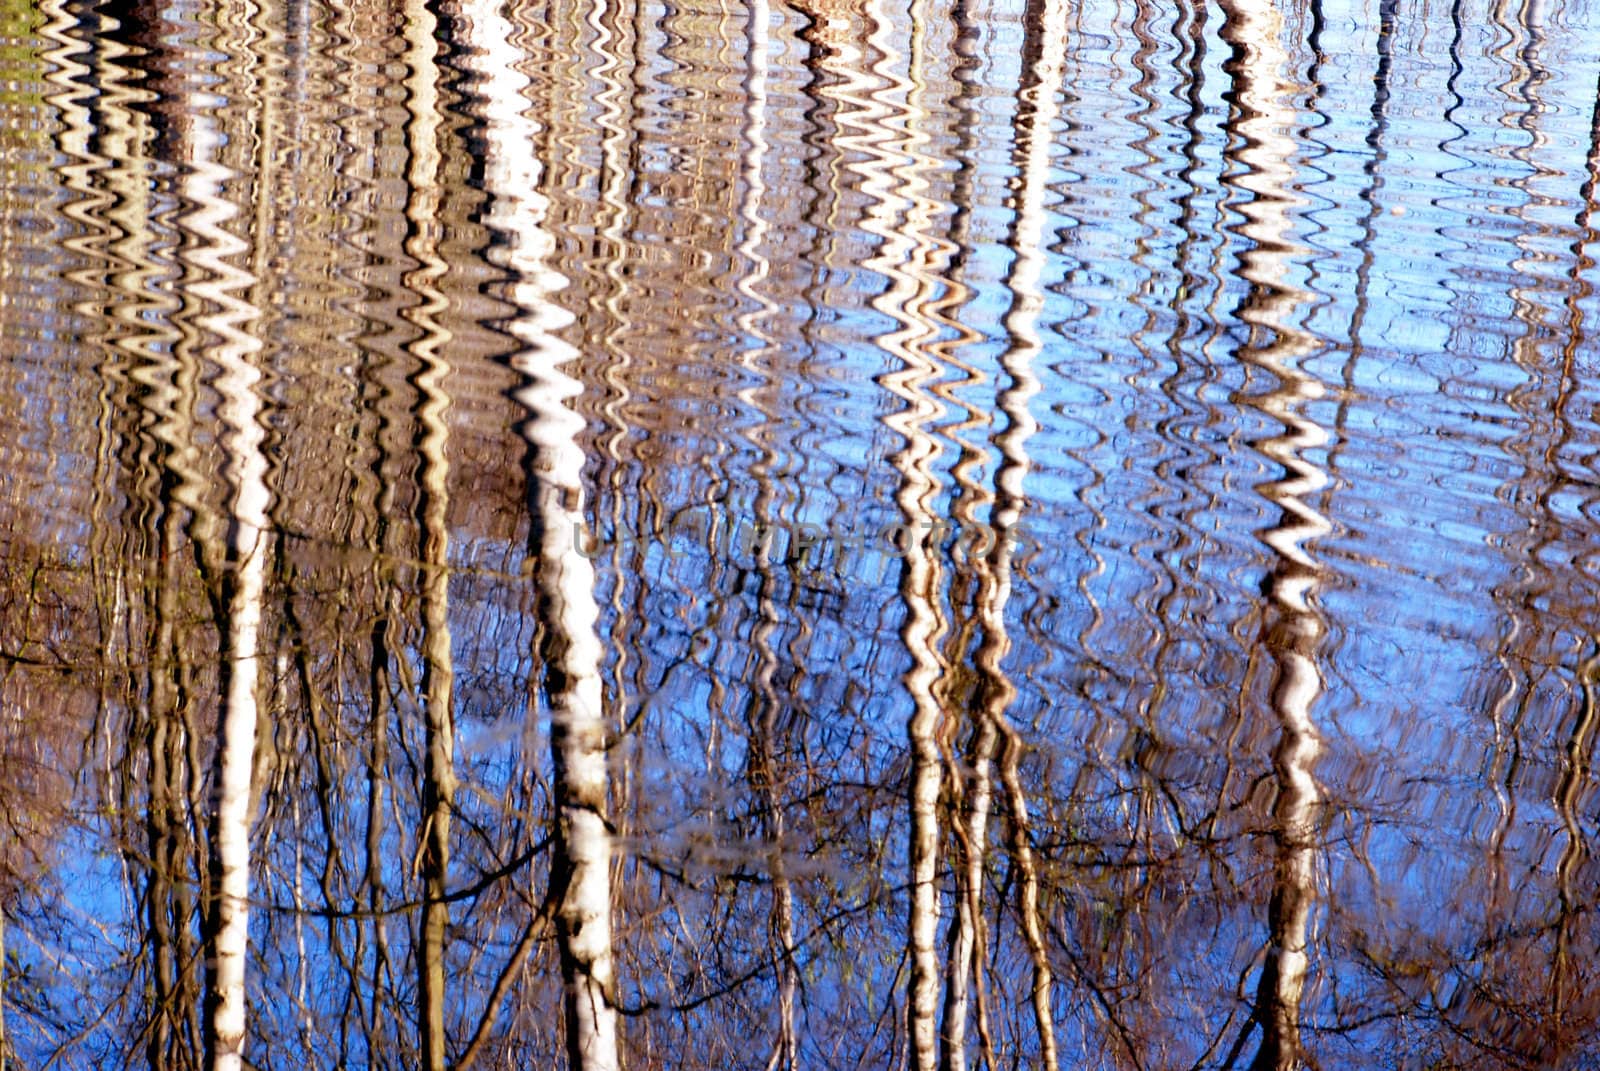 Spring birches reflections on the water formatted by wind blow.